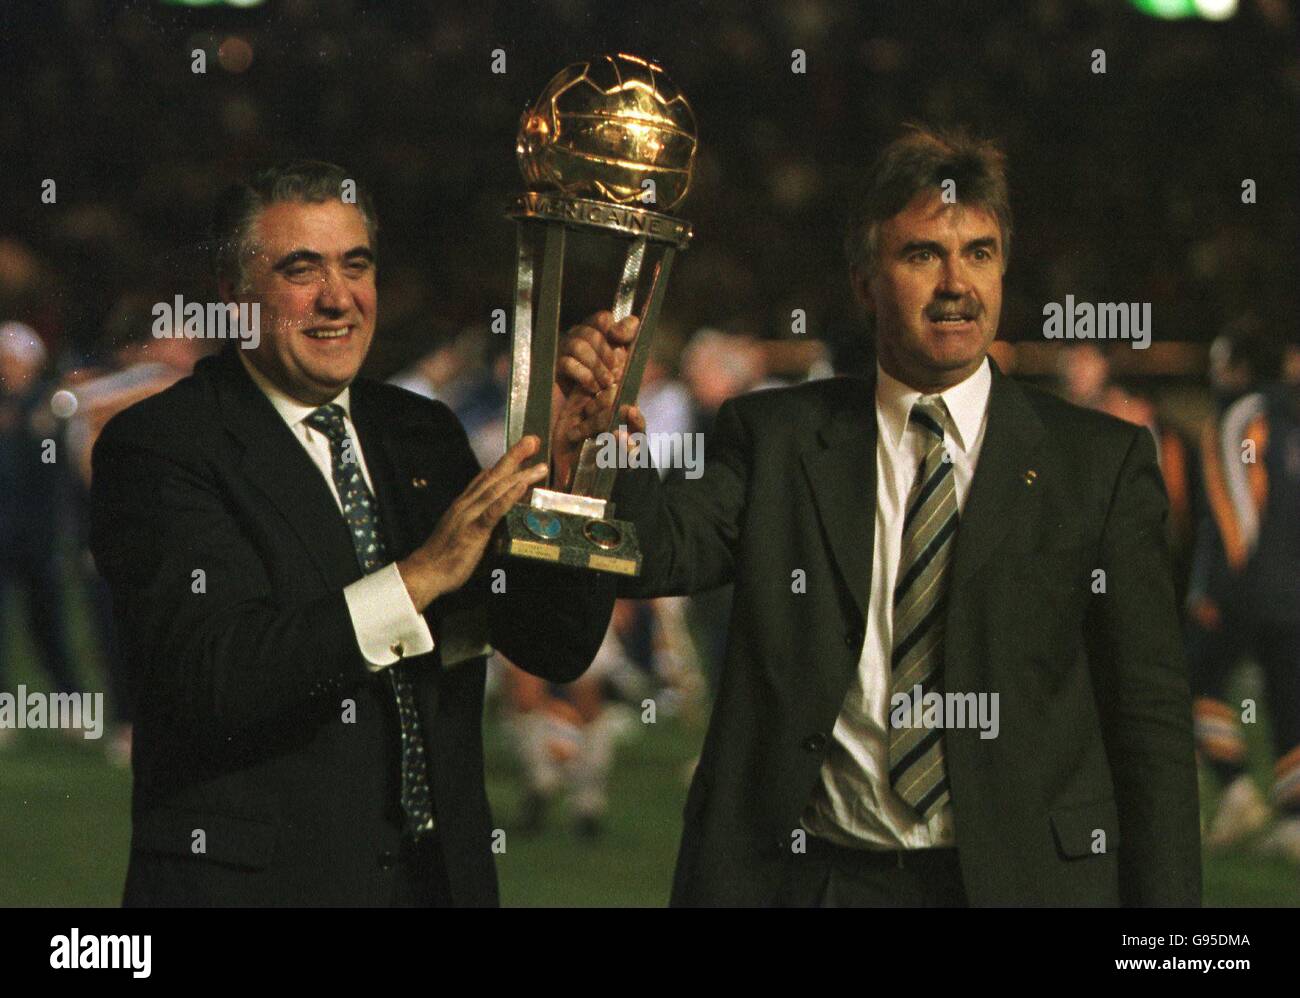 Soccer - World Club Championship - Toyota Cup - Real Madrid v Vasco da Gama, Tokyo, Japan. Real Madrid president Lorenzo Sanz and manager Guus Hiddink with the Toyota Cup trophy after Madrid beat Vasco 2-1 in Japan Stock Photo